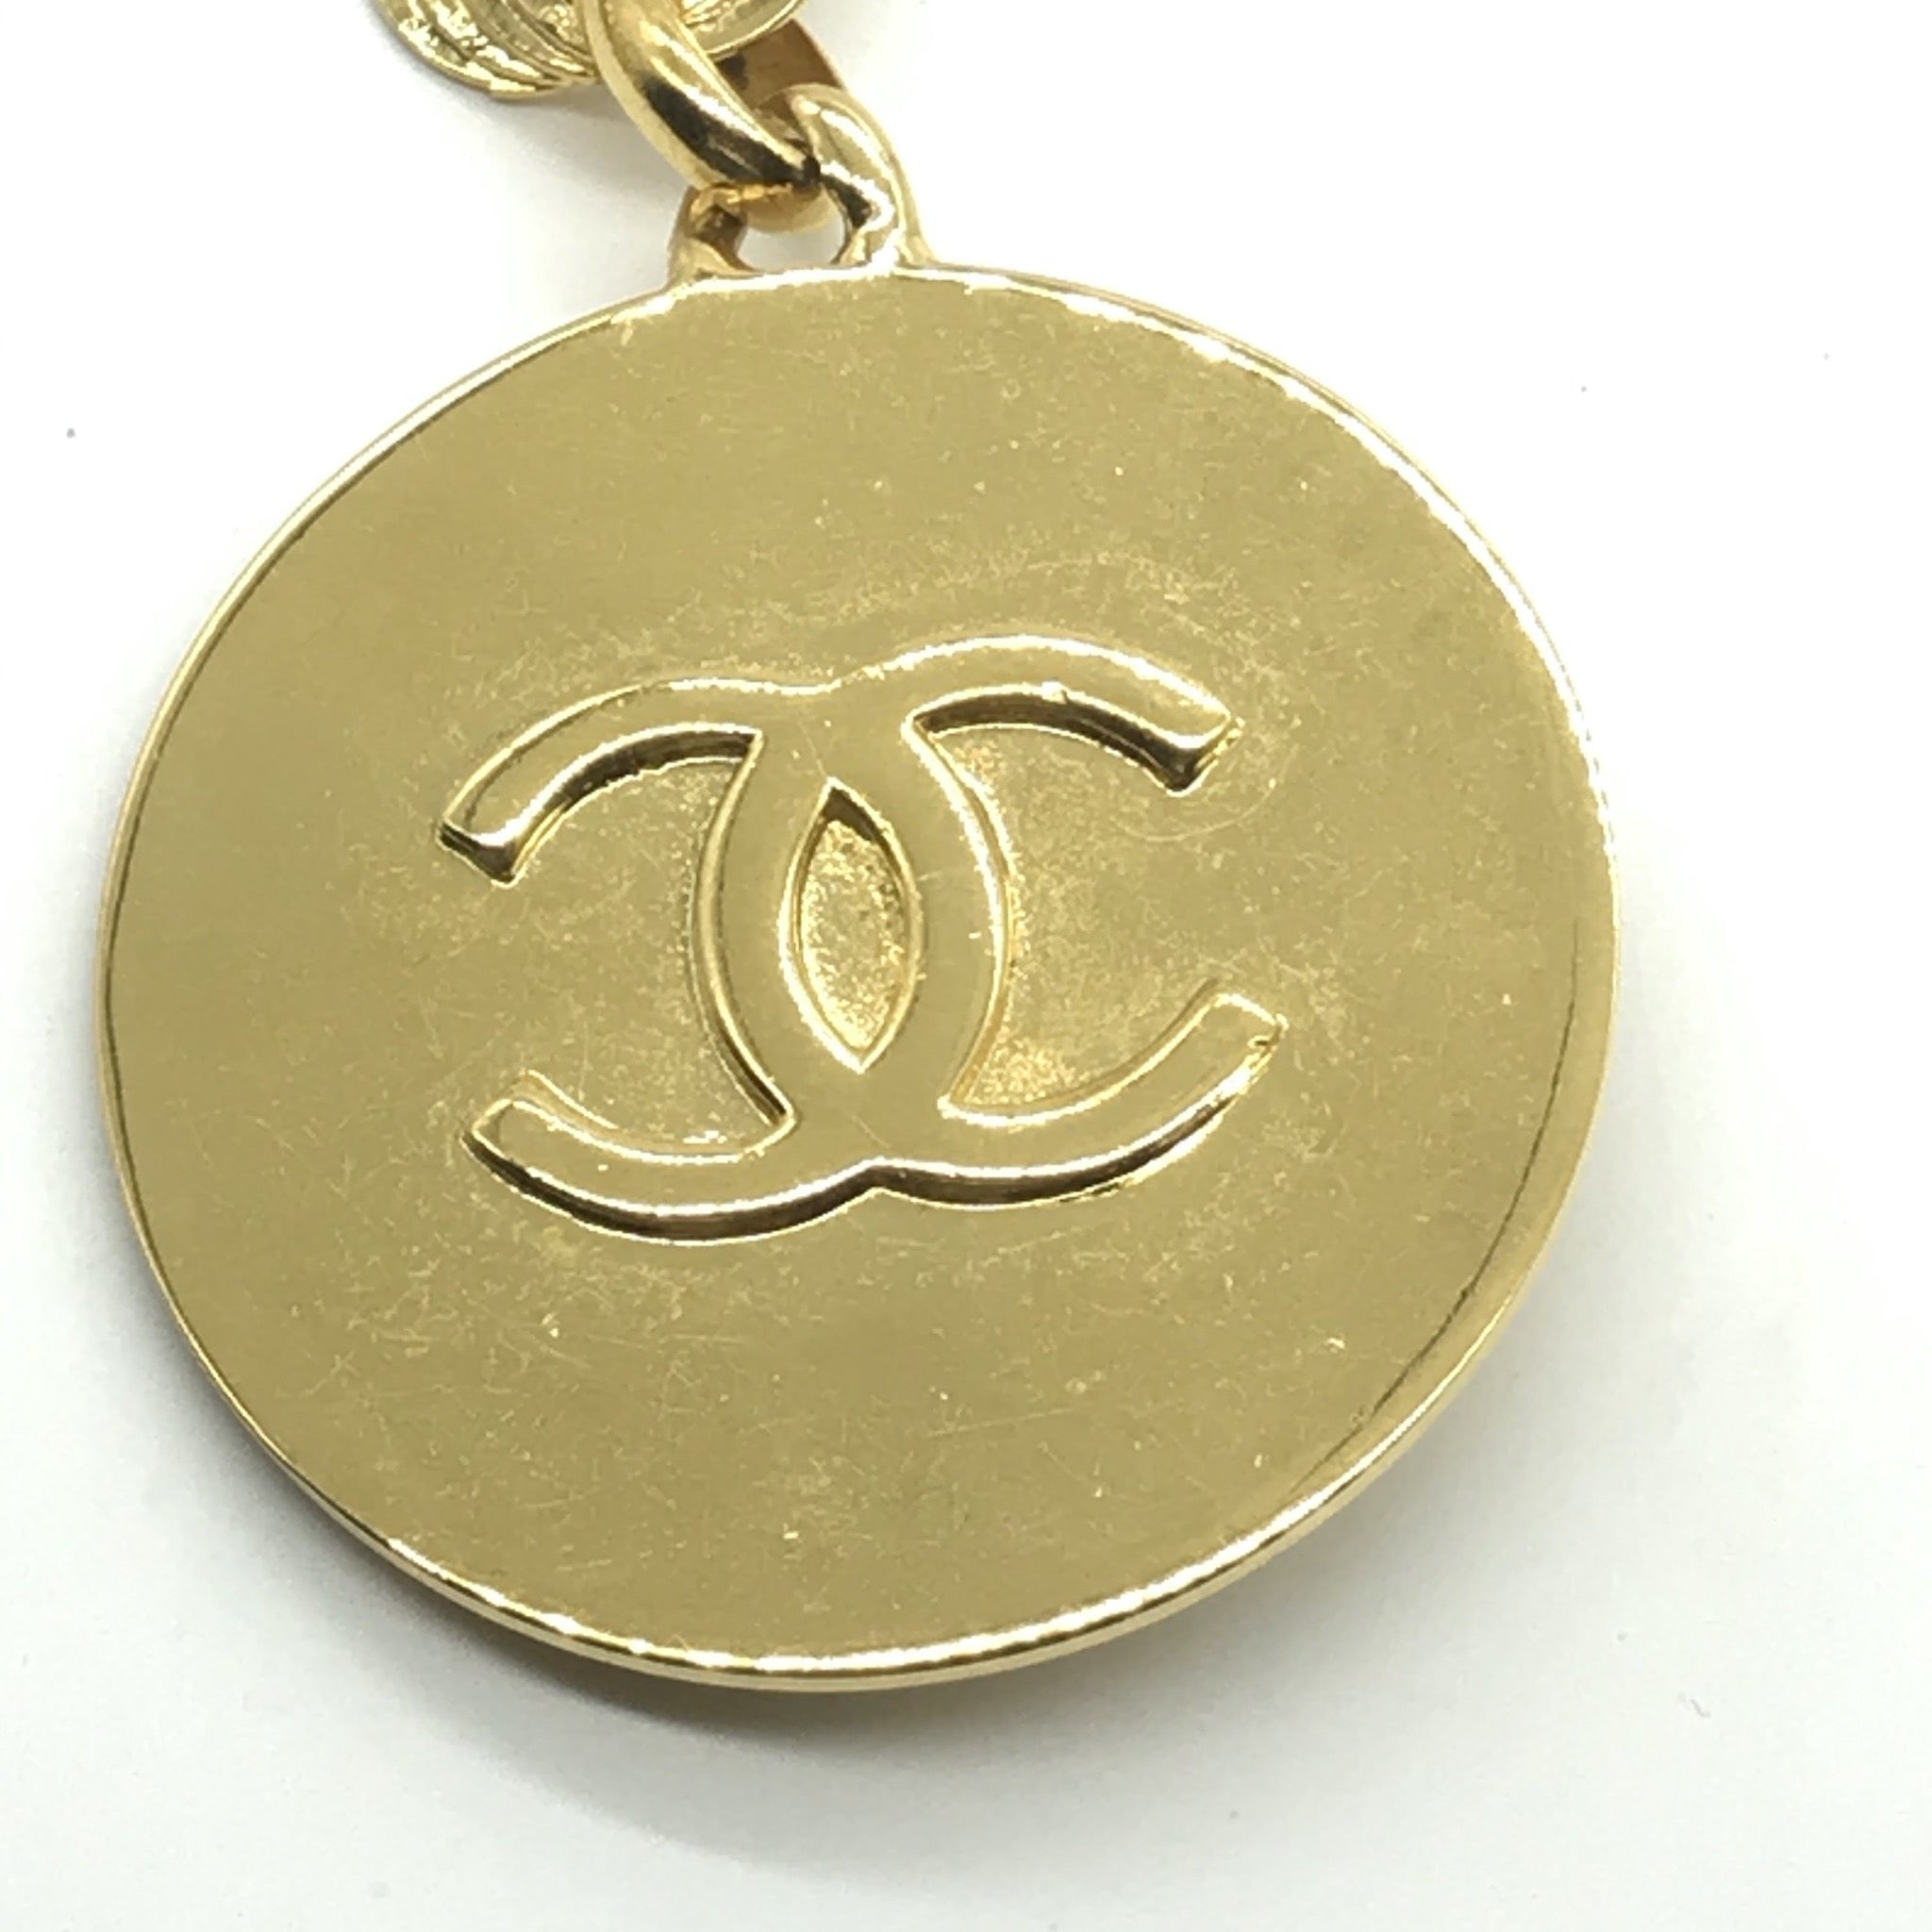 Chanel Necklace with Round Pendant - VeryVintage – Very Vintage